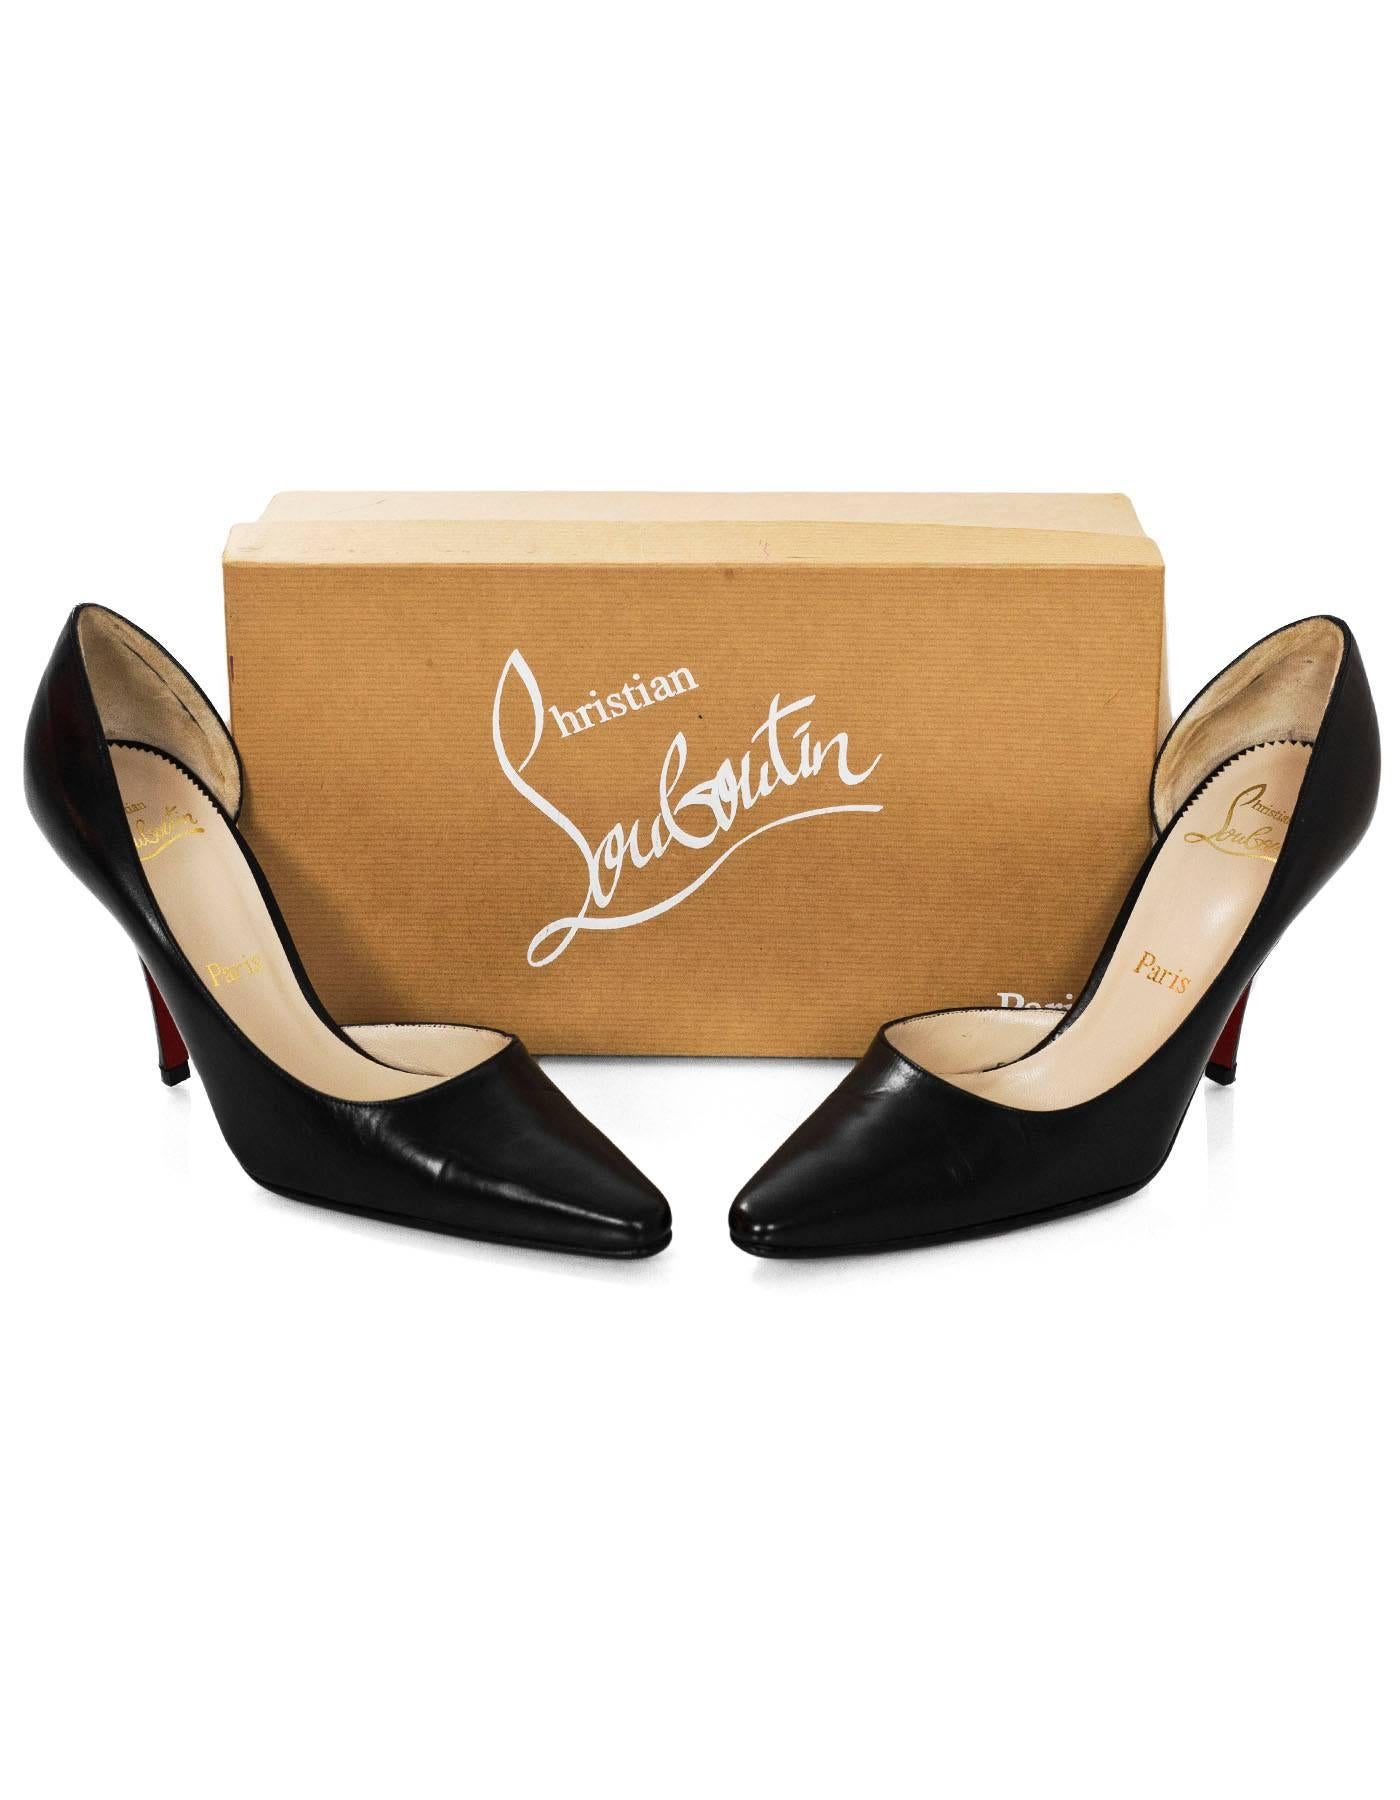 Christian Louboutin Black Leather d'Orsay Pumps Sz 37.5 with Box 2